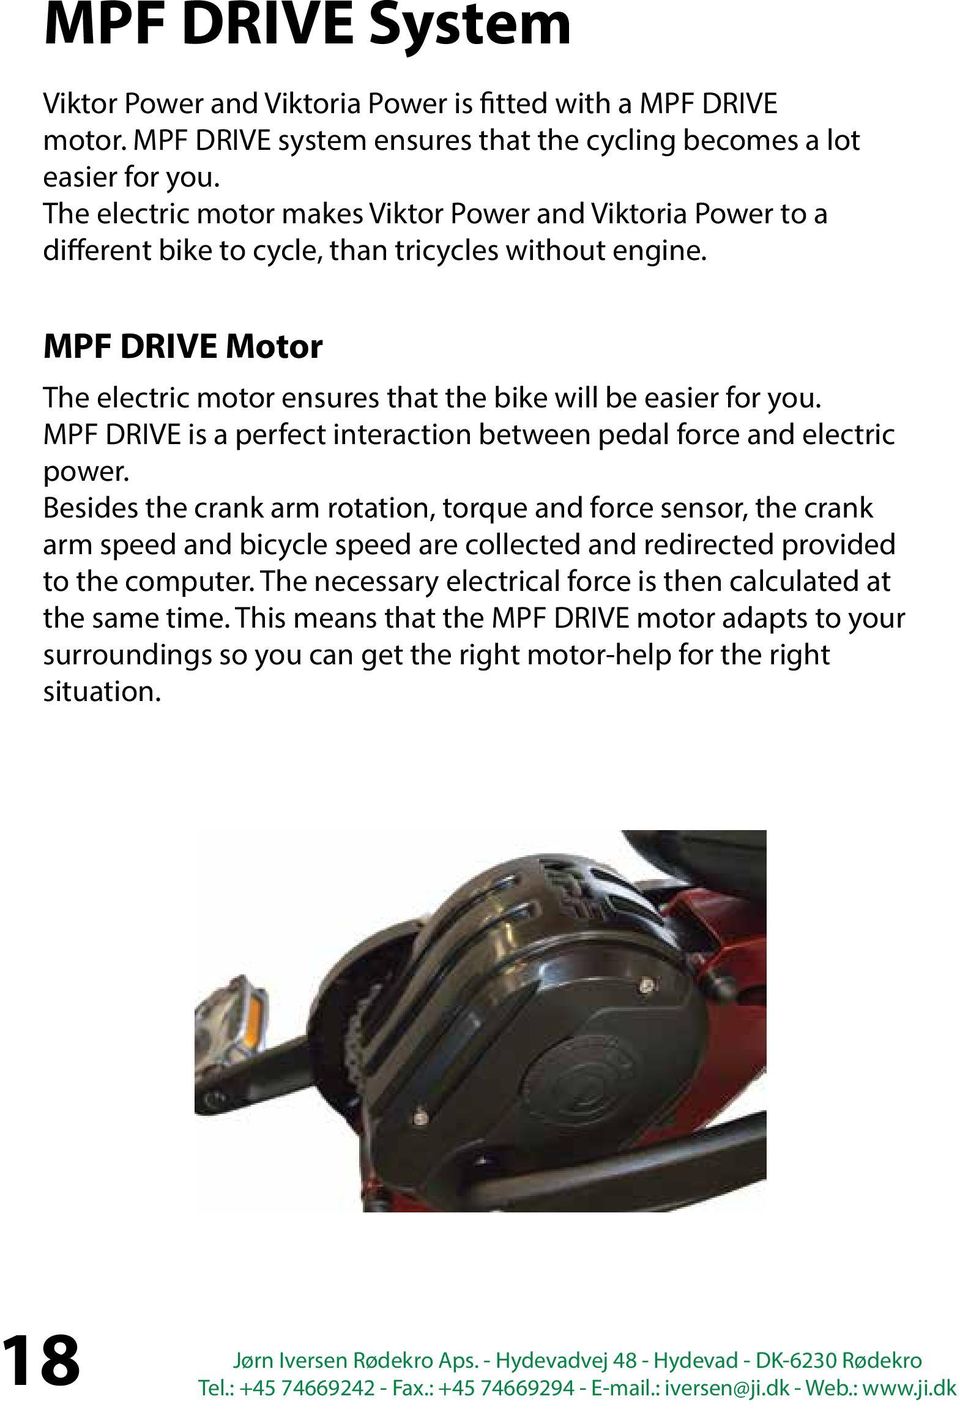 MPF DRIVE Motor The electric motor ensures that the bike will be easier for you. MPF DRIVE is a perfect interaction between pedal force and electric power.